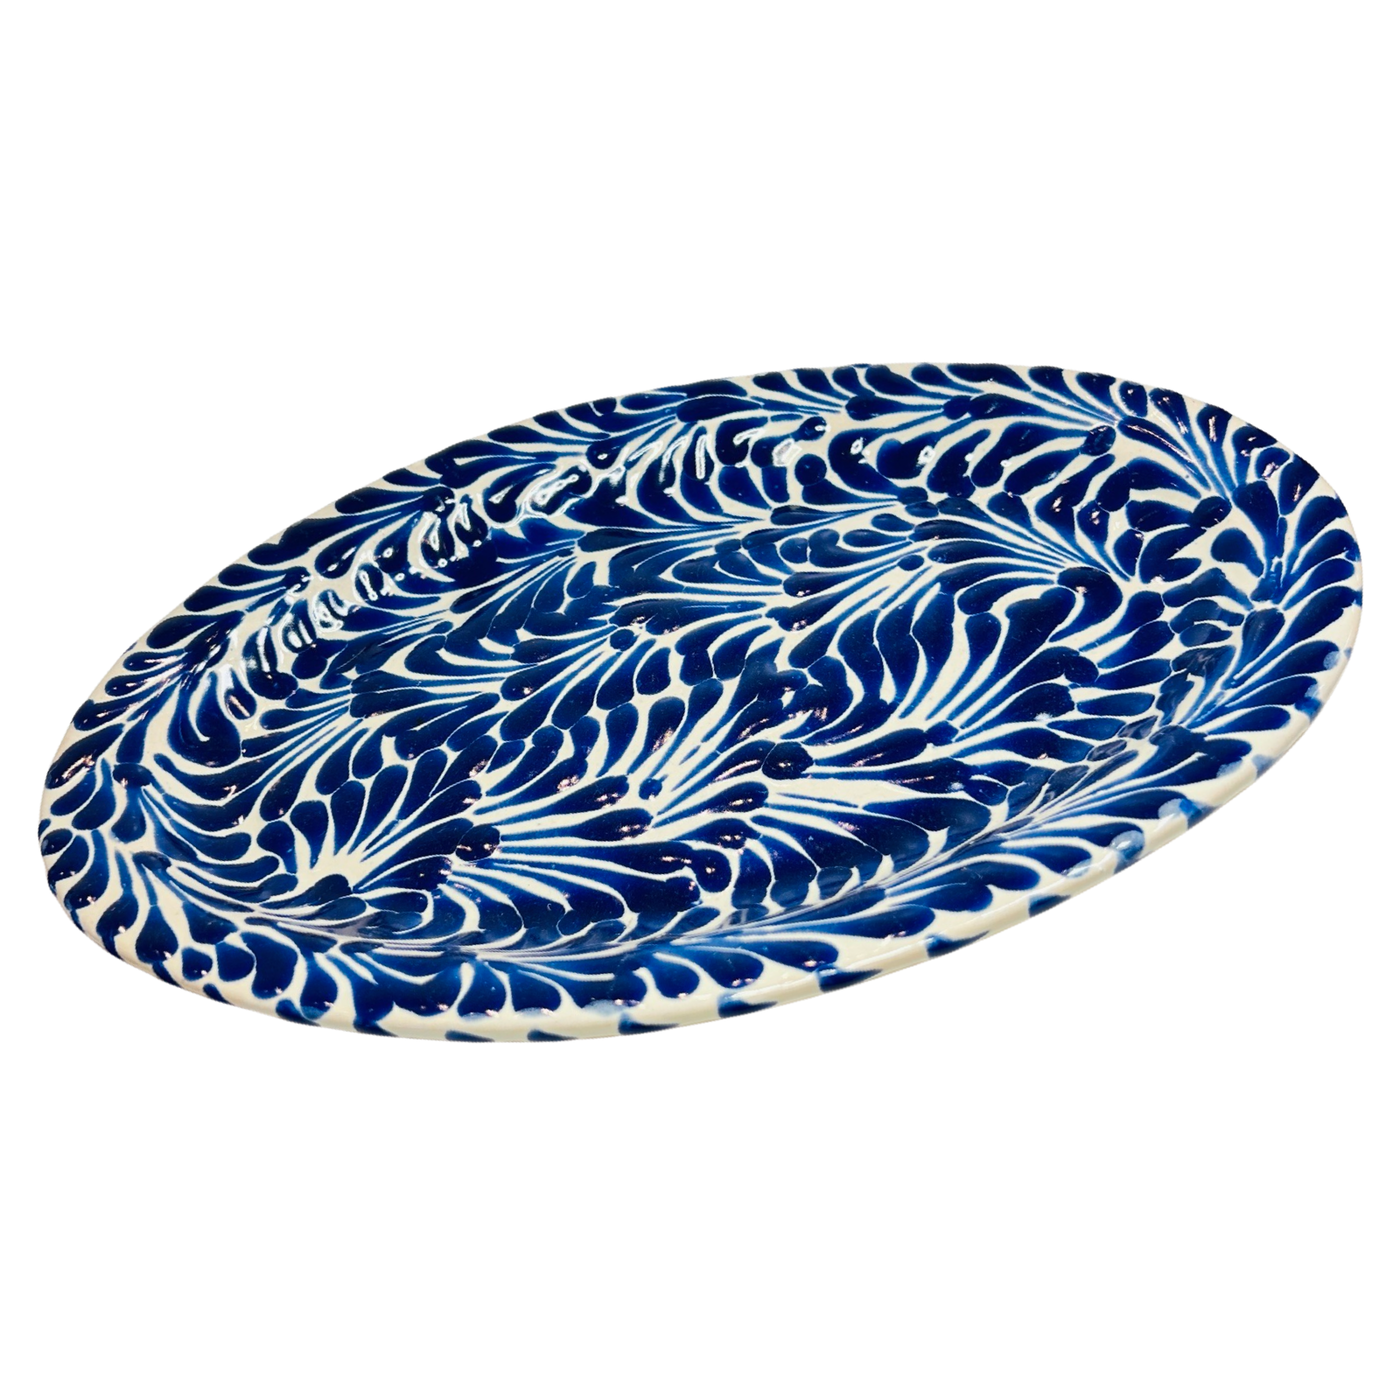 side angled view of a oval blue and white talavera dish